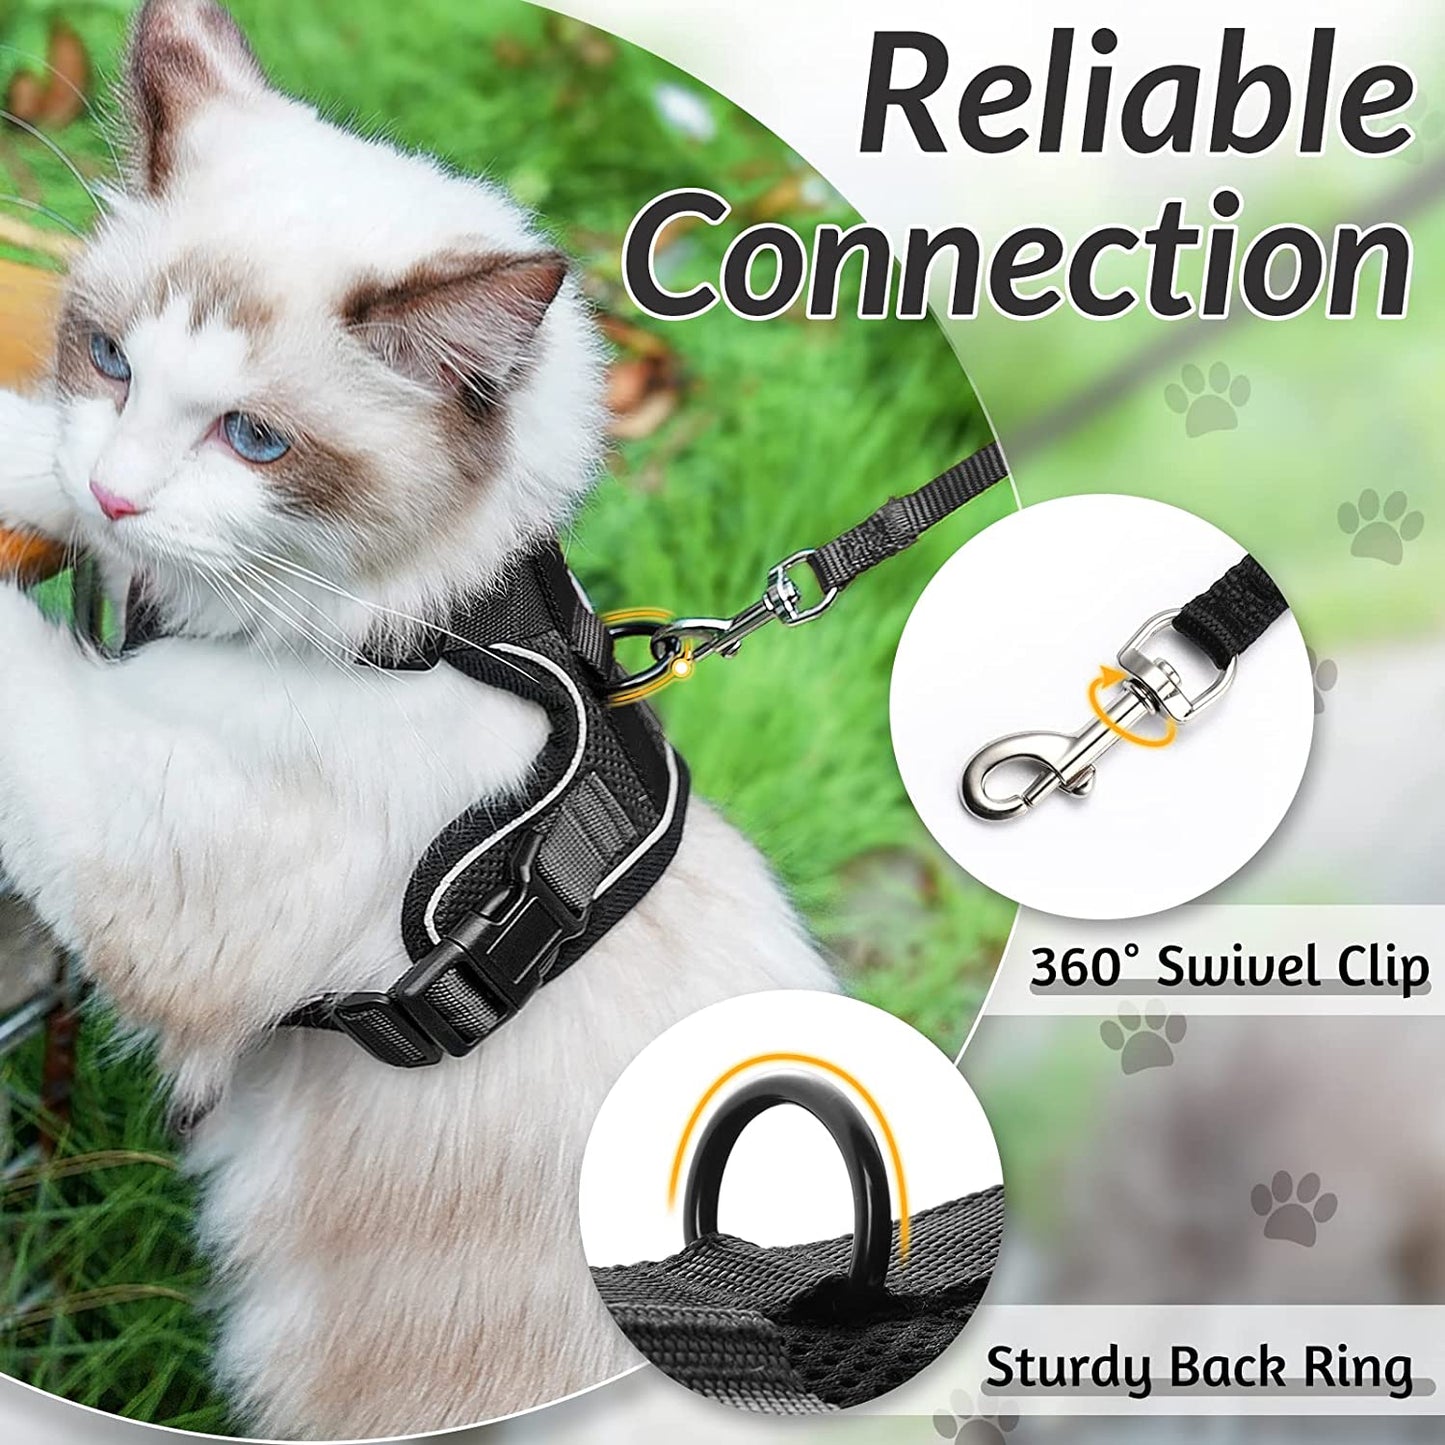 Cat Harness and Leash for Walking, Escape Proof Soft Adjustable Vest Harnesses for Cats, Easy Control Breathable Reflective Strips Jacket, Black, XS